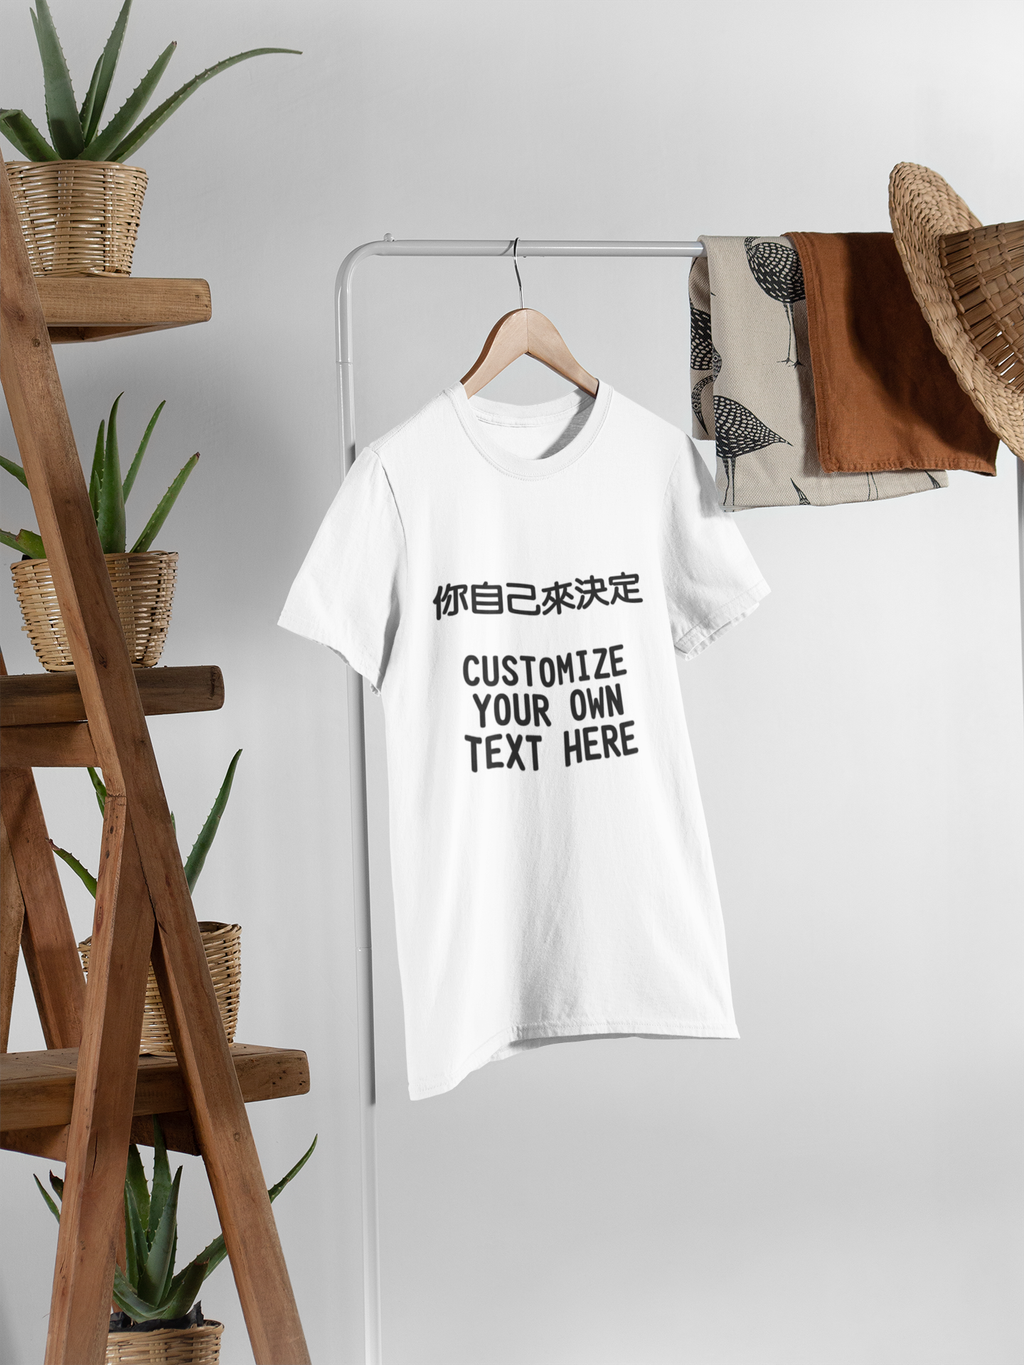 tee-mockup-hanging-from-a-rack-next-to-wooden-furniture-with-plant-pots-27400.png